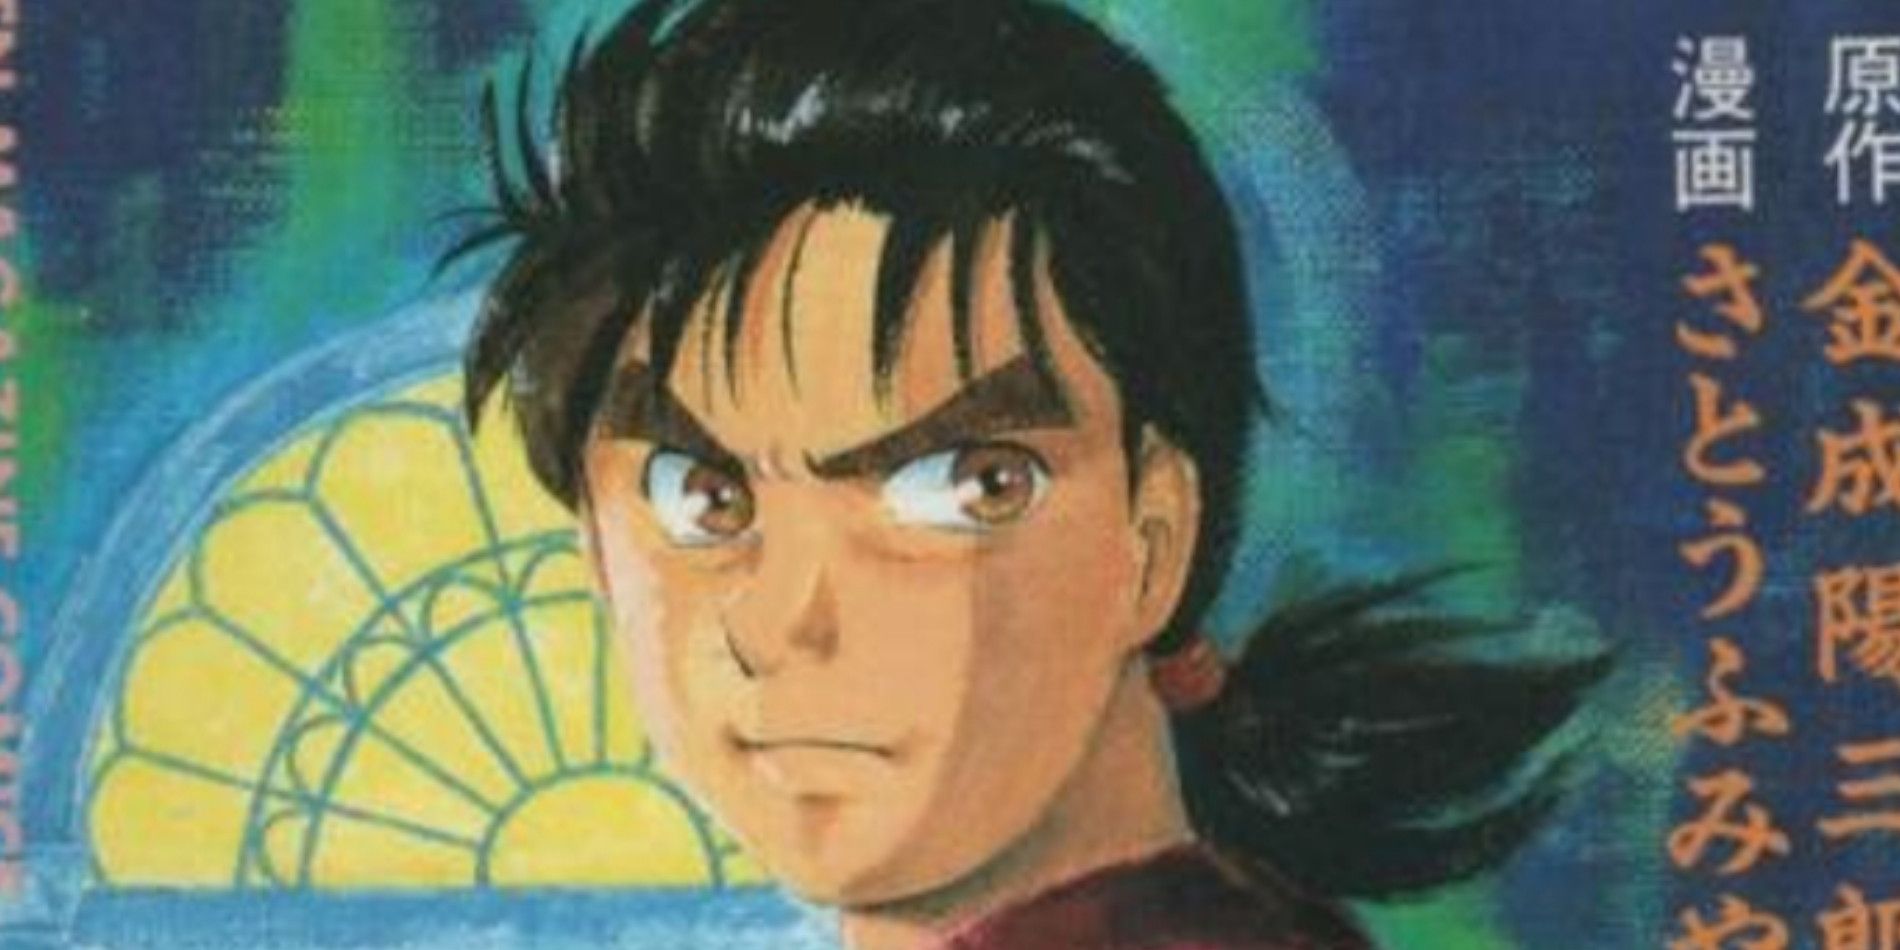 Hajime Kindaichi looking off to the side with a serious expression in The Kindaichi Case Files